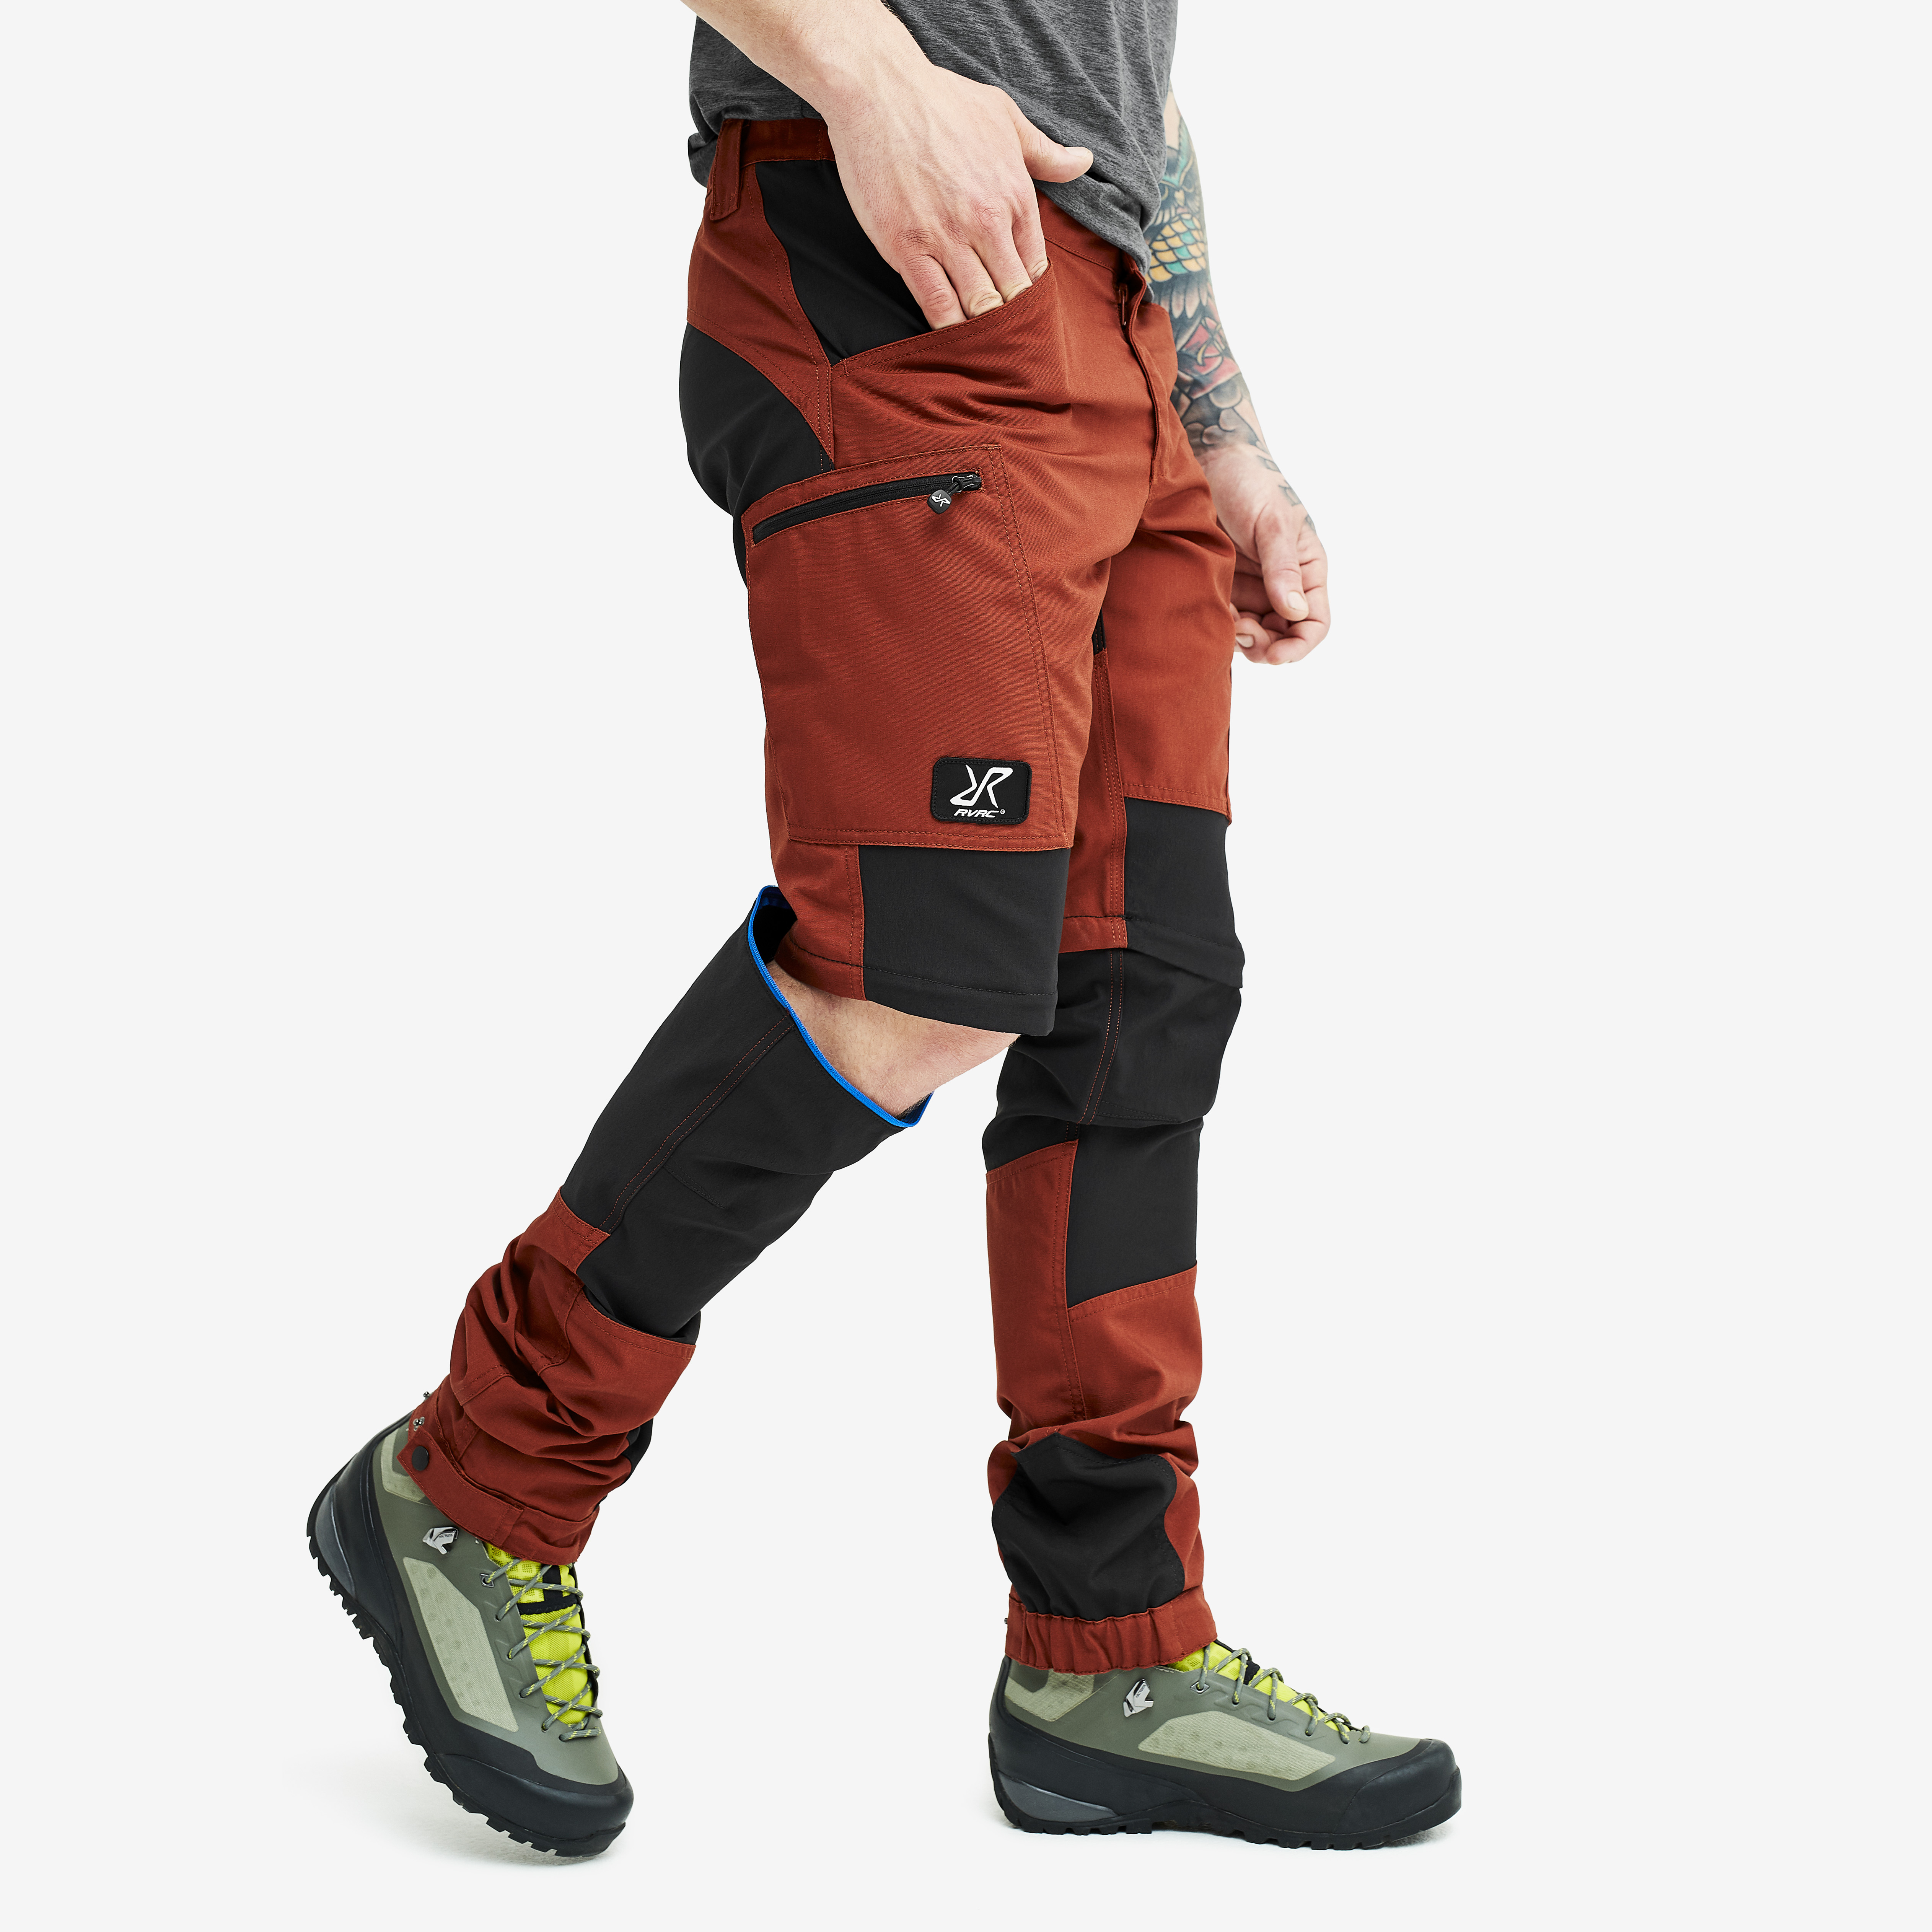 Nordwand Pro Zip-off hiking trousers for men in orange